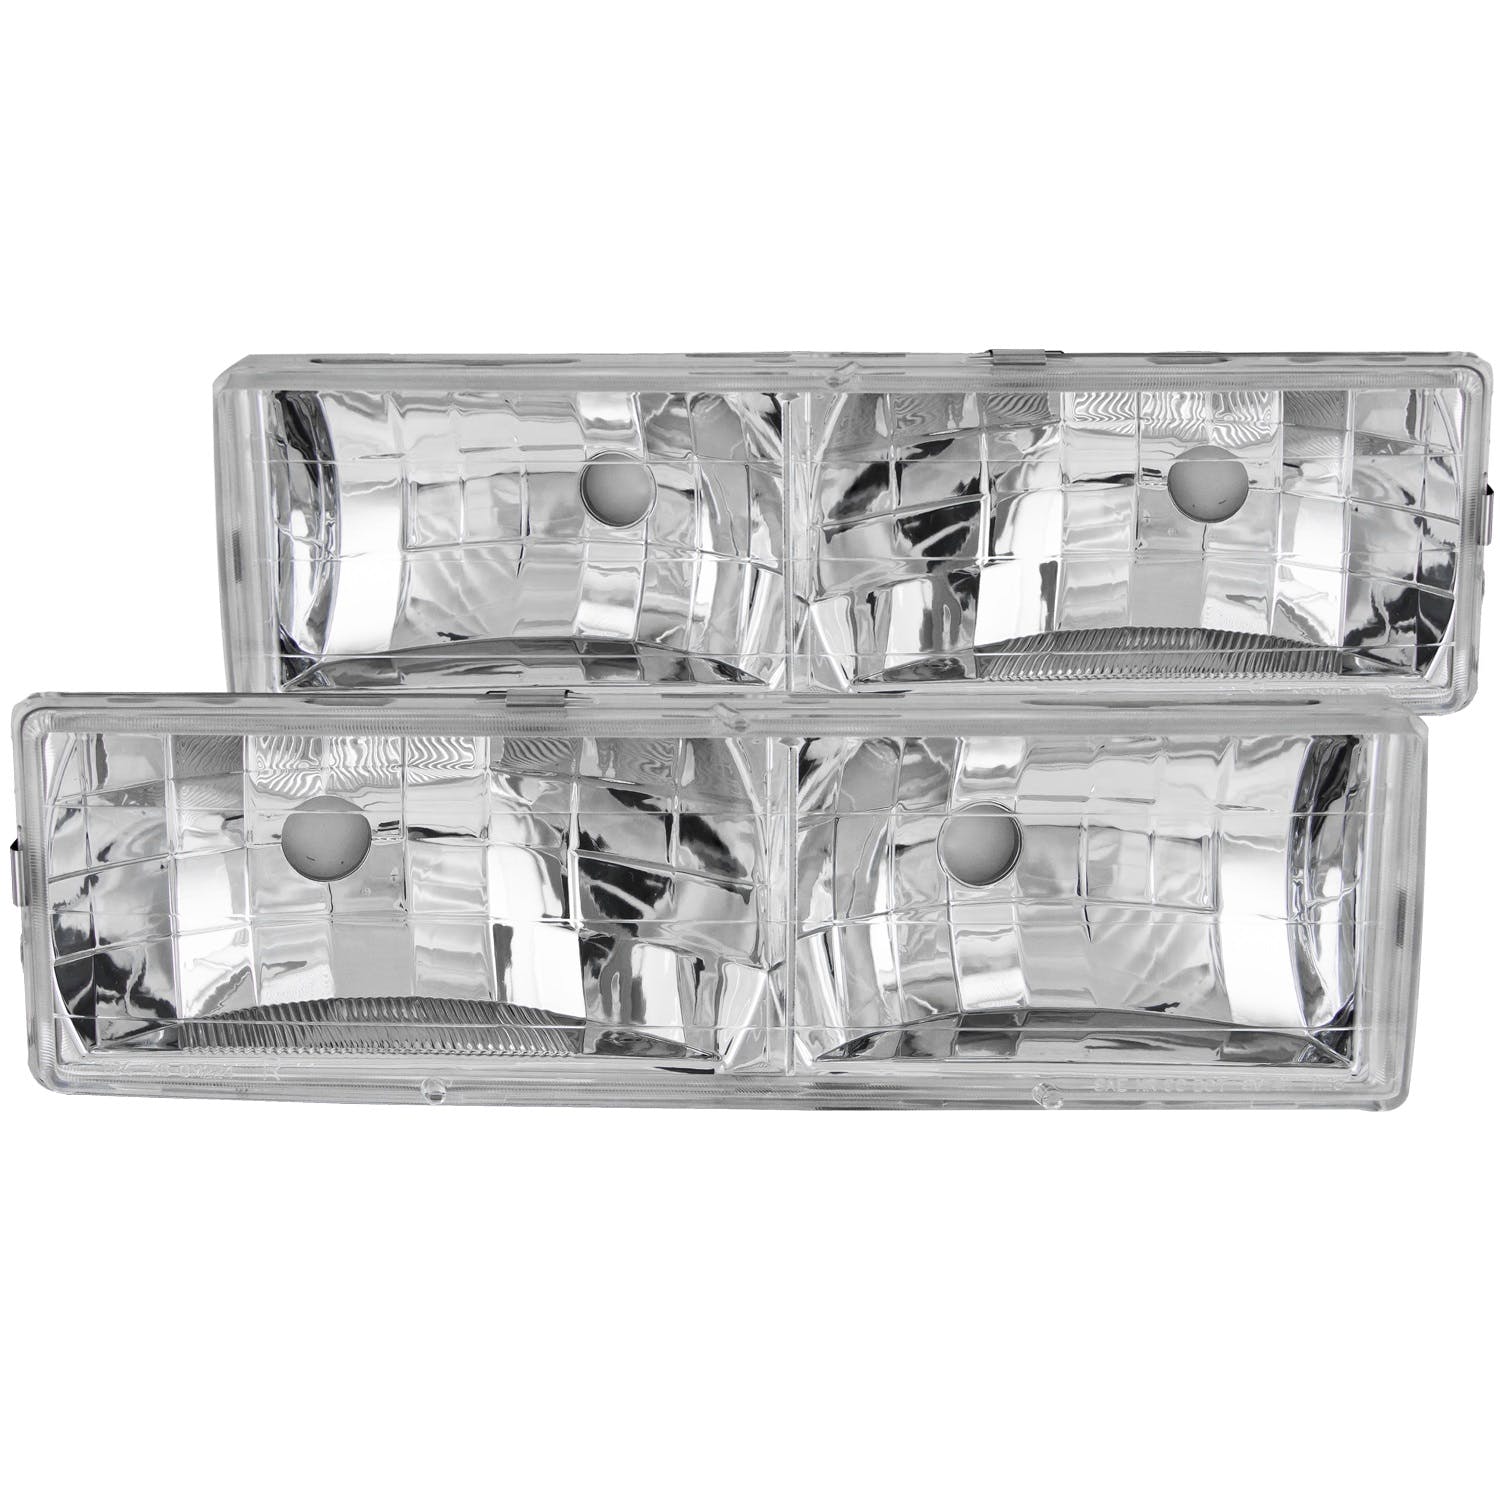 AnzoUSA 111136 Crystal Headlights Chrome without Bulbs